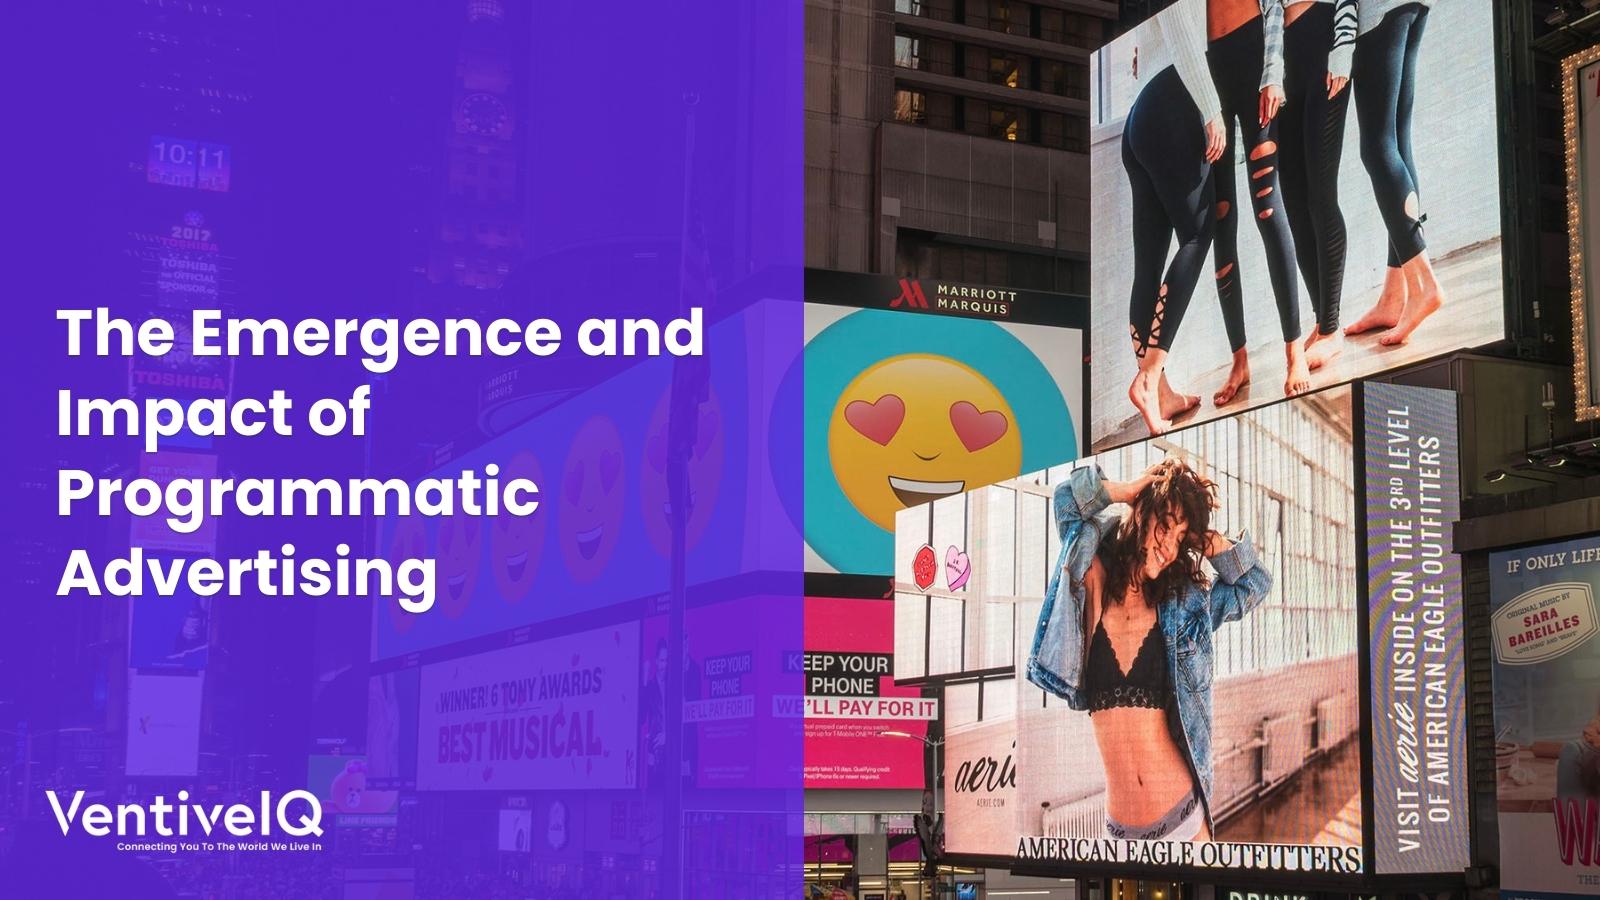 The Emergence and Impact of Programmatic Advertising